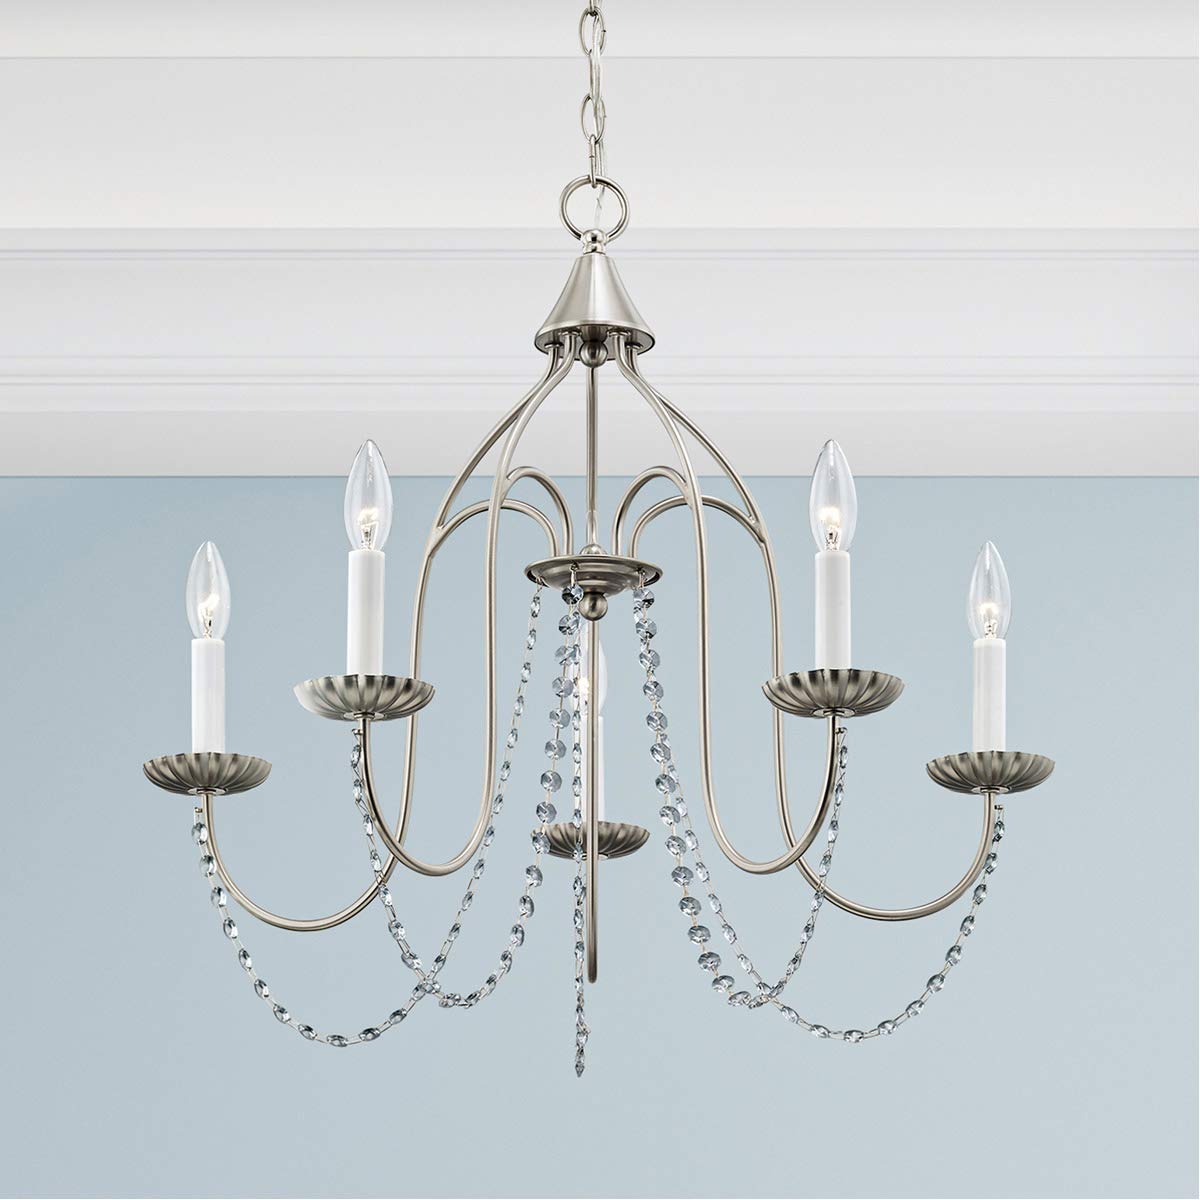 Livex Lighting 40795-91 Transitional Five Light Chandelier from Alessia Collection in Pwt, Nckl, B/S, Slvr. Finish, Brushed Nickel